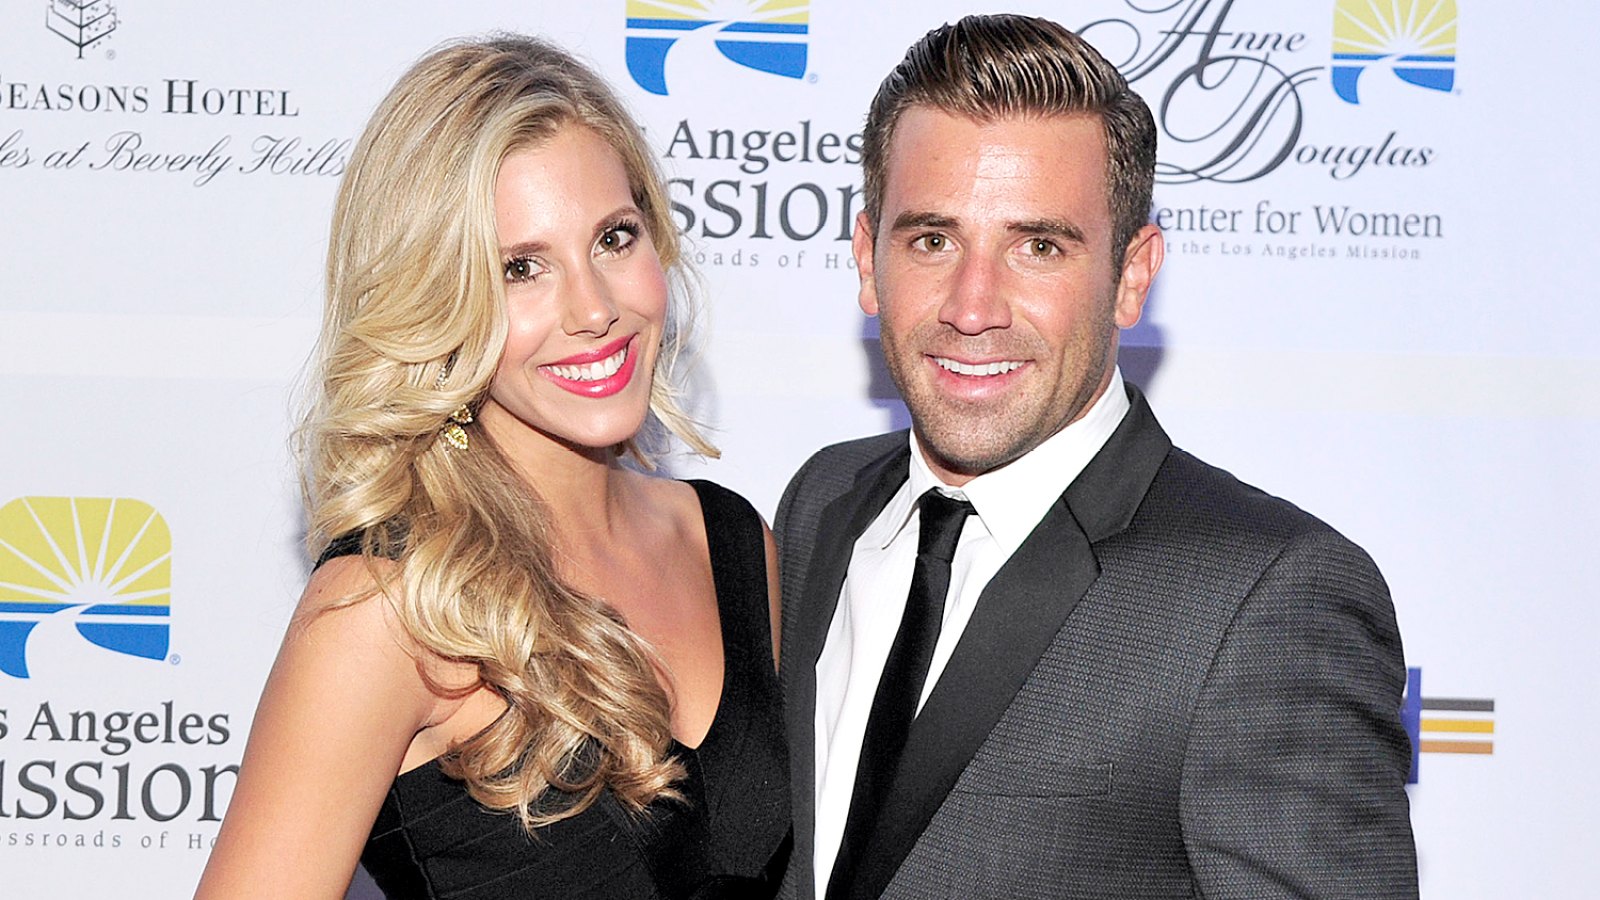 Ashley Slack and Jason Wahler attend the Los Angeles Mission's "Legacy of Vision" Gala at the Four Seasons Hotel Beverly Hills on September 24, 2013 in Beverly Hills, California.